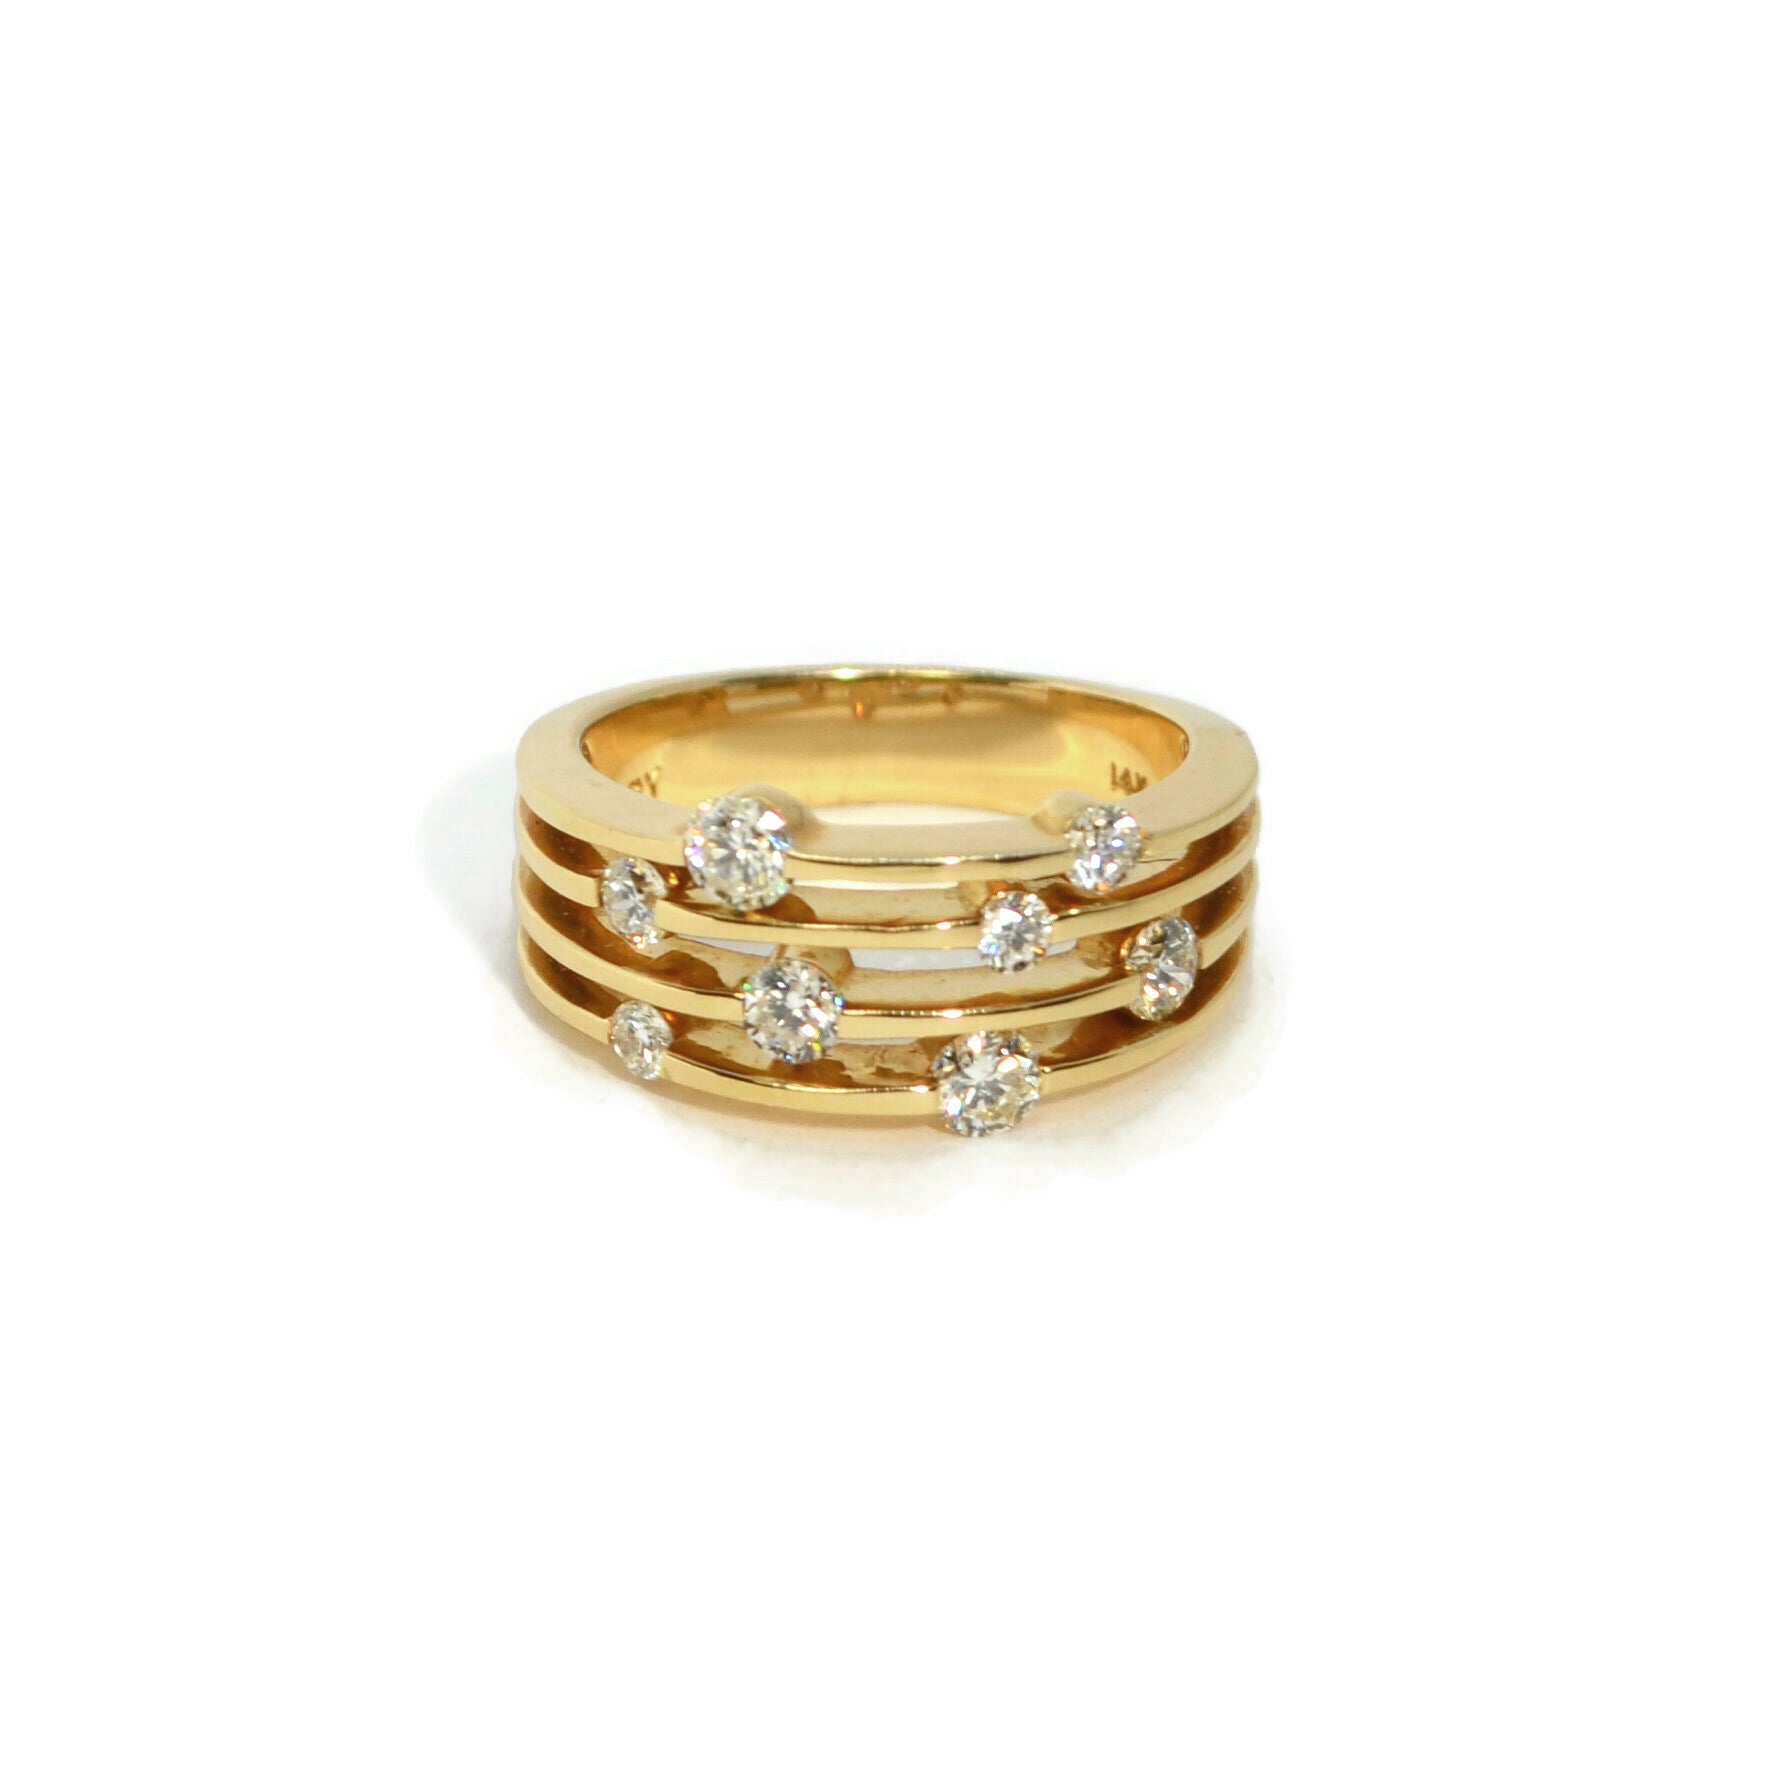 AFJ Diamond Collection - Band Ring with Diamonds and Yellow Gold